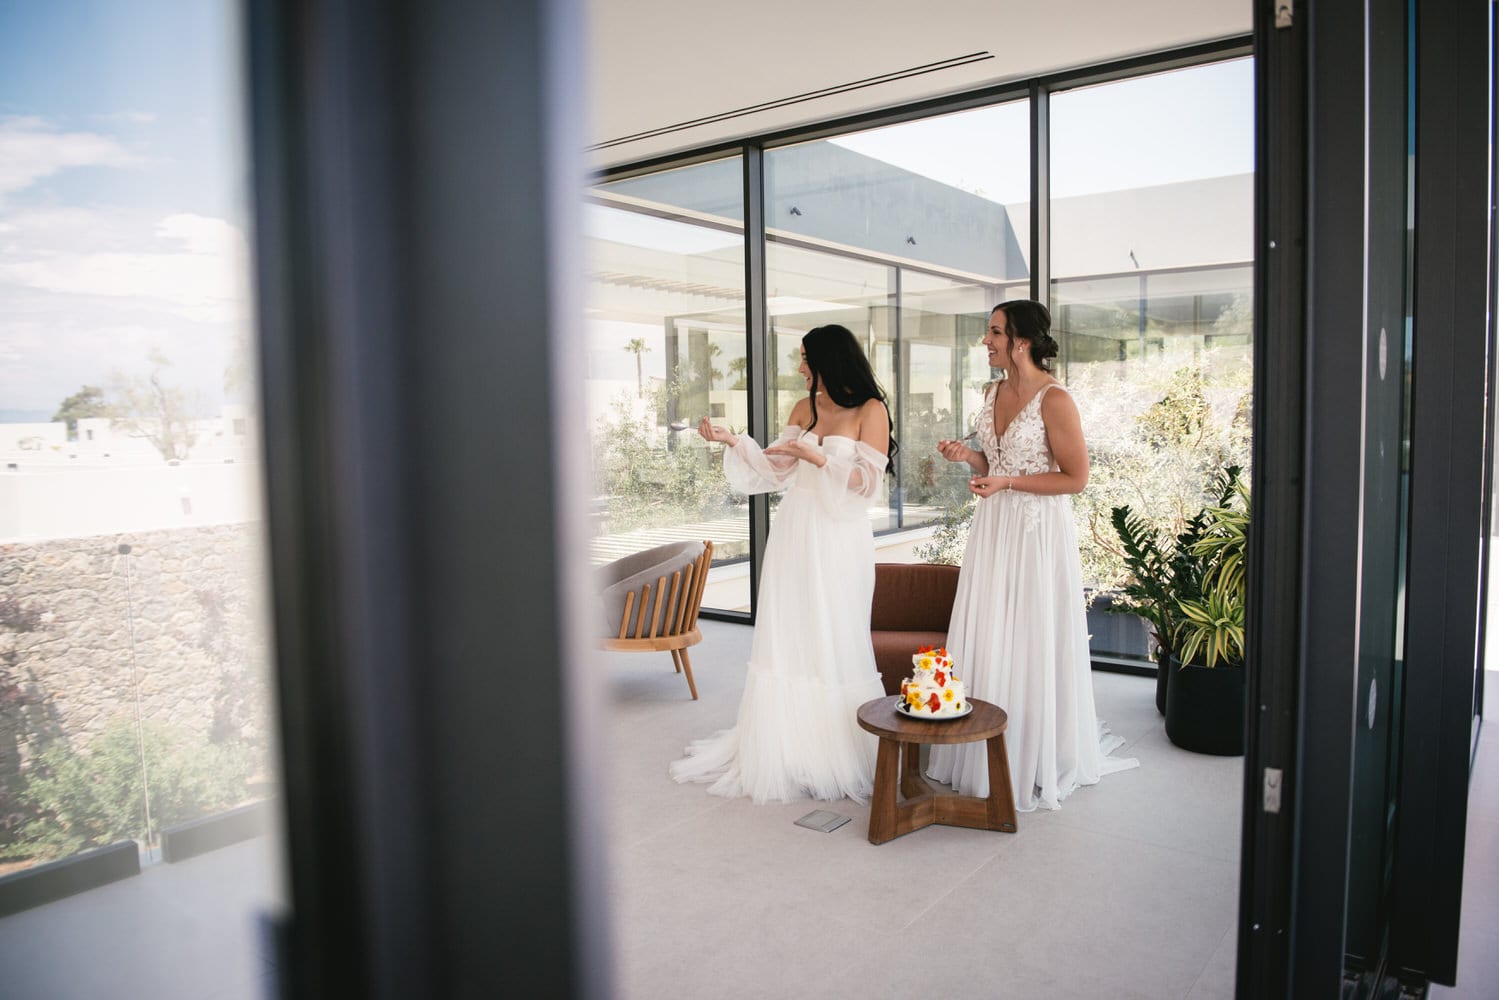 Brides relaxing in the hotel, comfort and joy after their Corfu elopement.